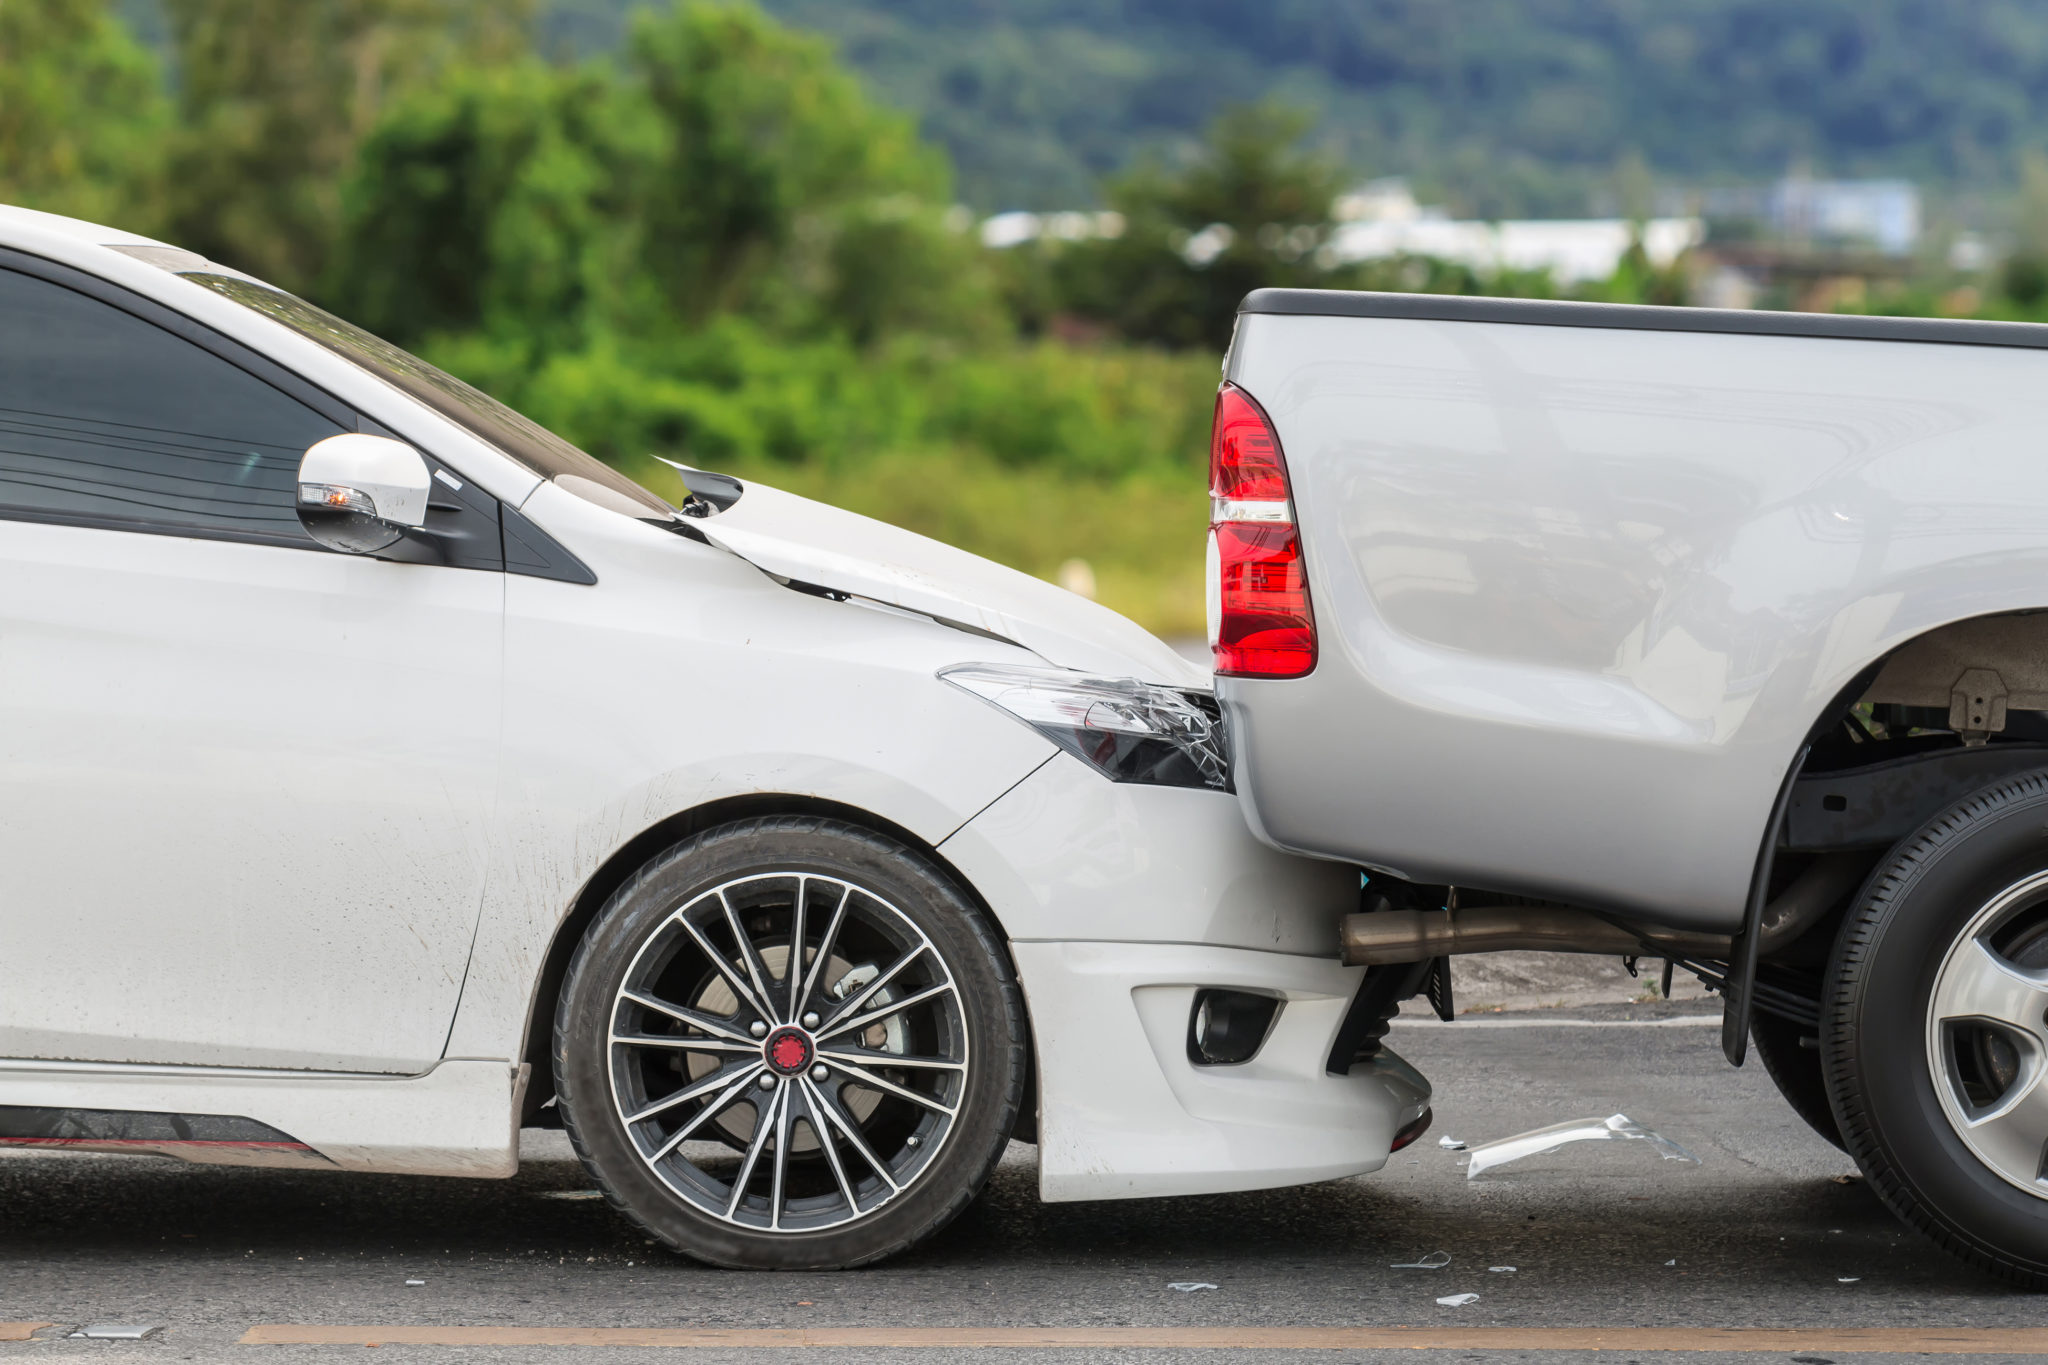 Common Injuries After Rear-End Auto Accident